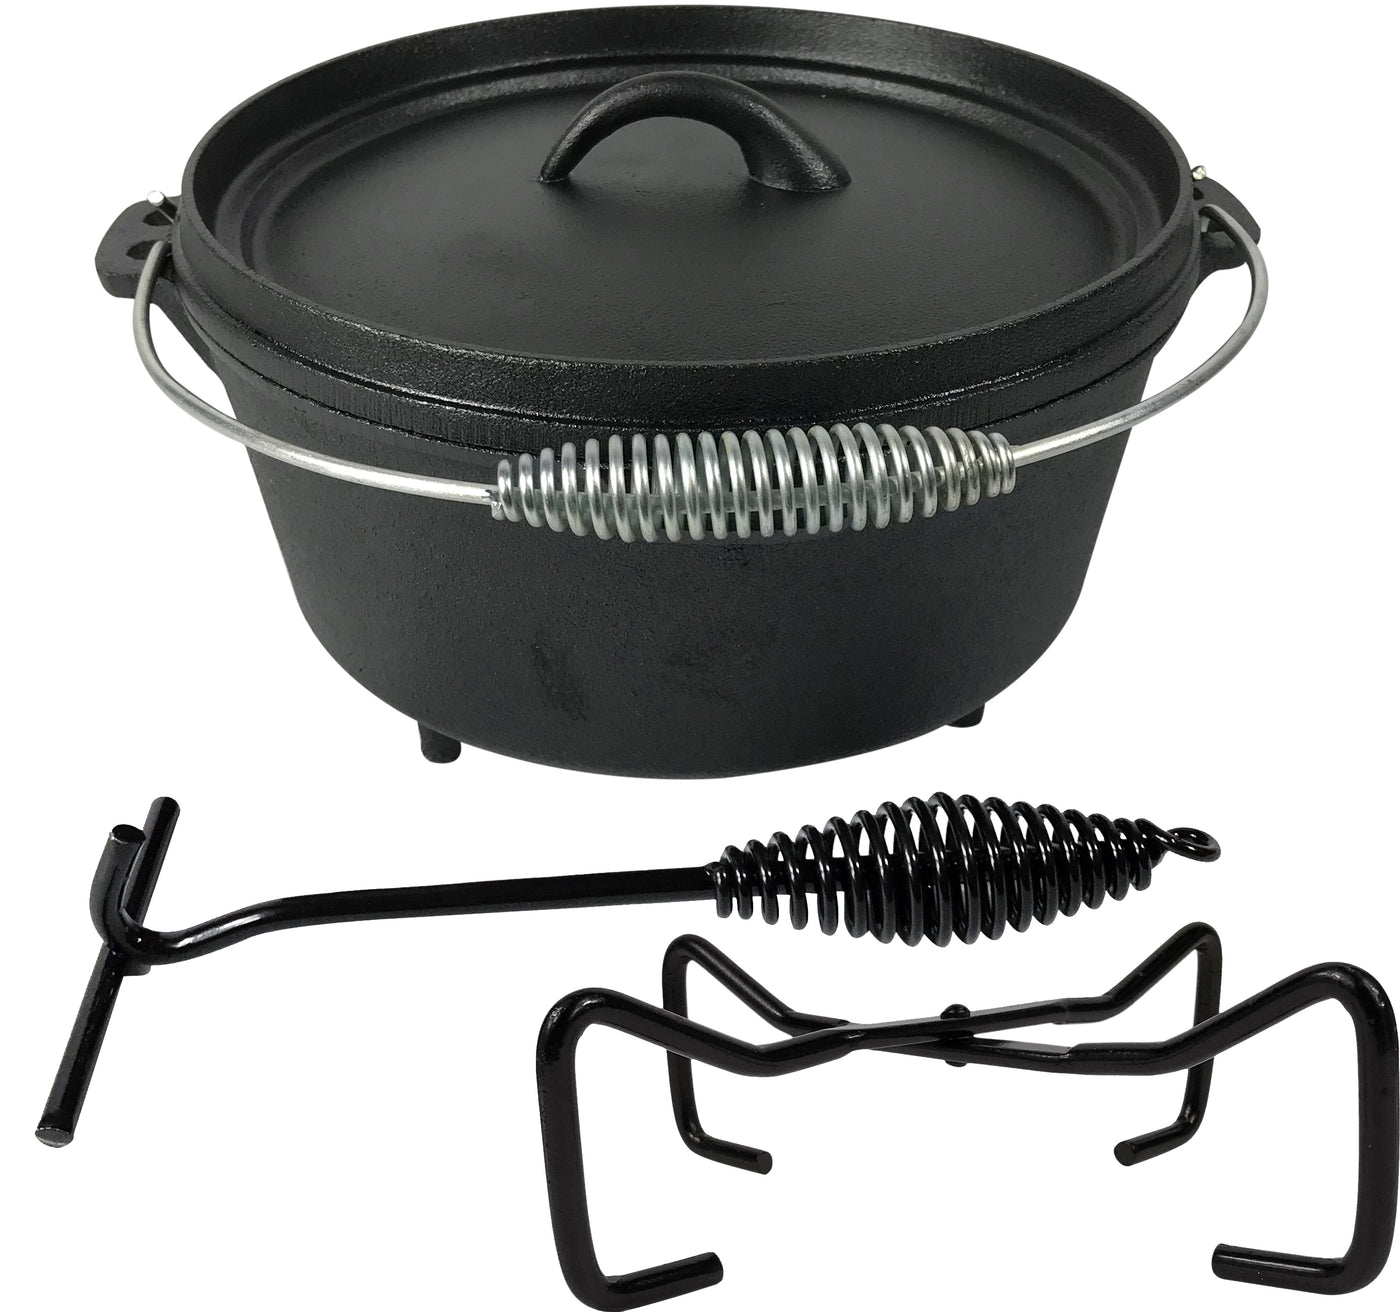 Cast Iron Camp Dutch Oven with Legs